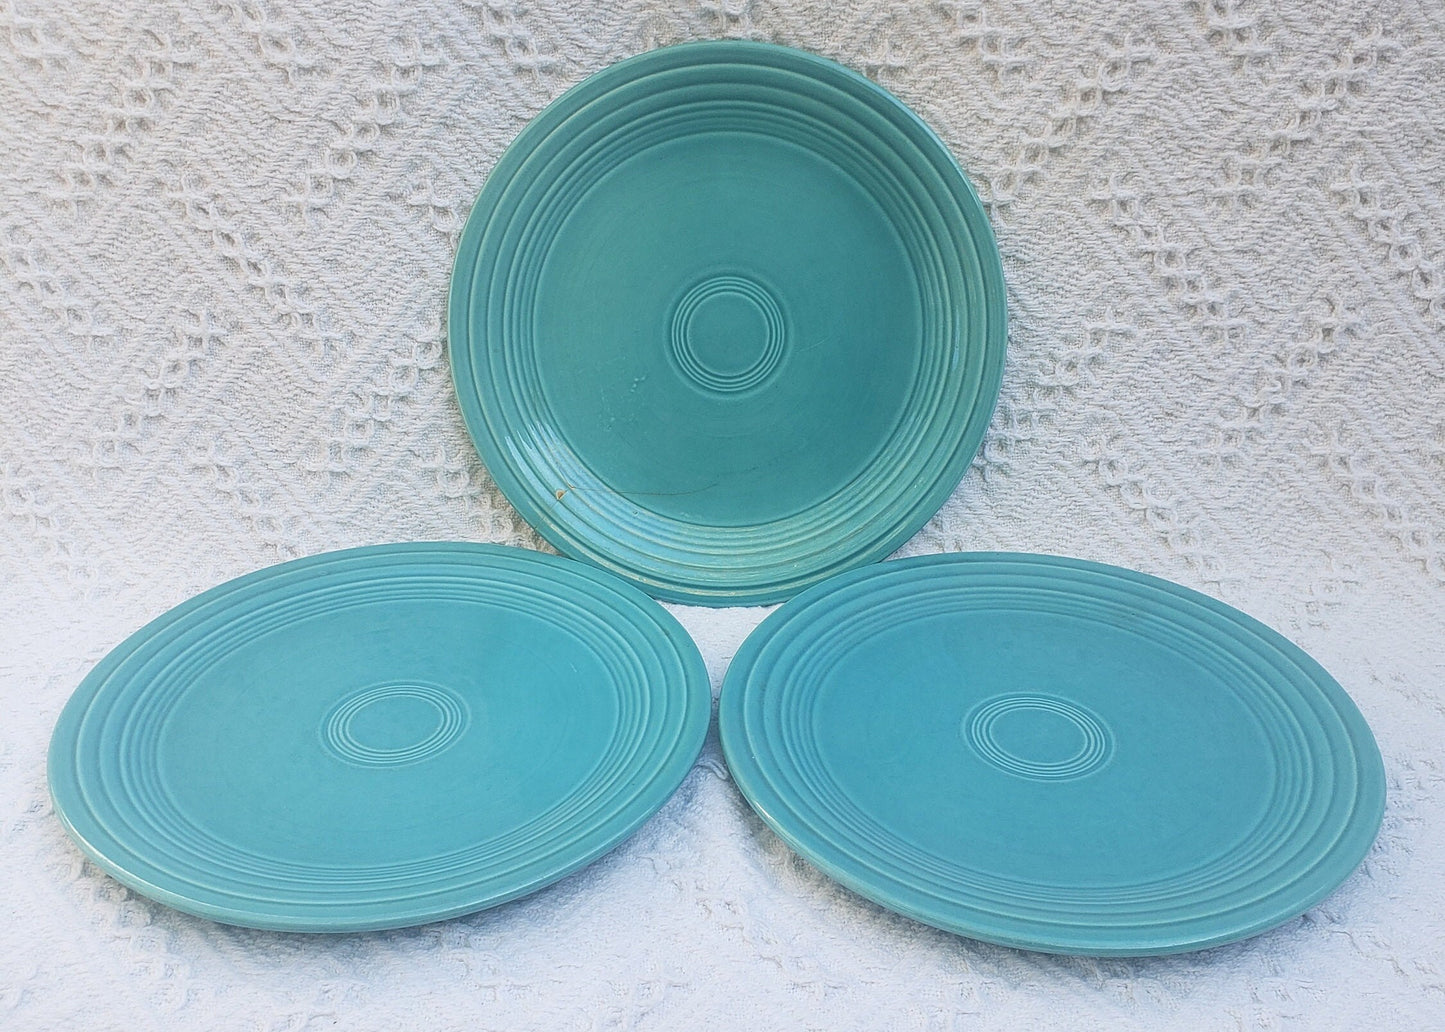 Vintage Fiesta Pottery 9" Lunch Plate